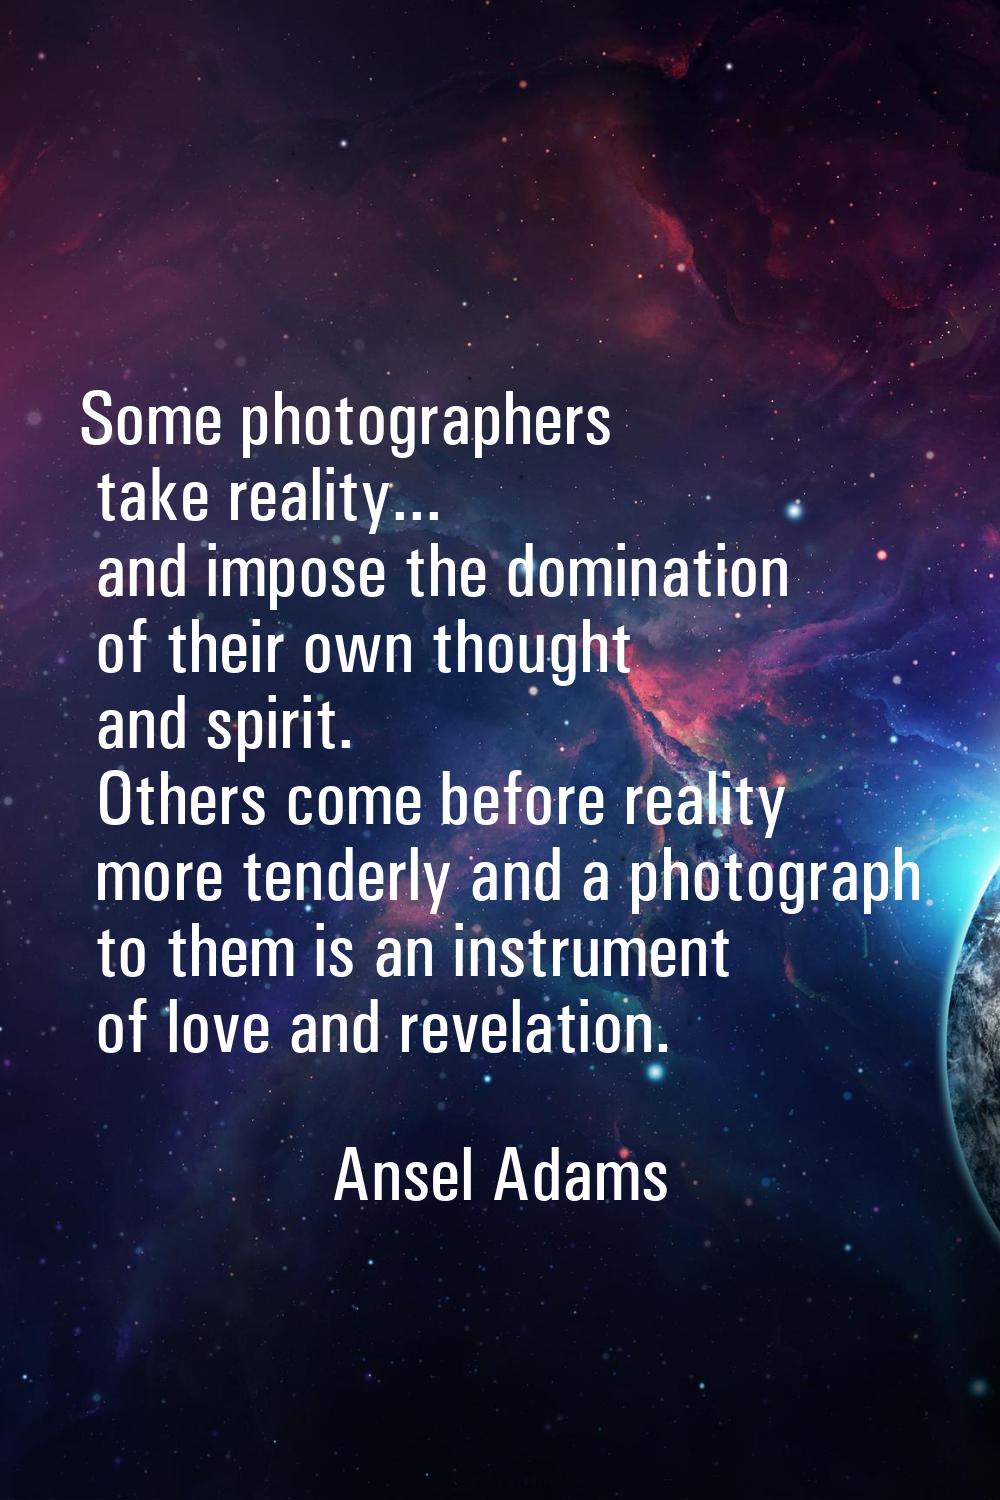 Some photographers take reality... and impose the domination of their own thought and spirit. Other